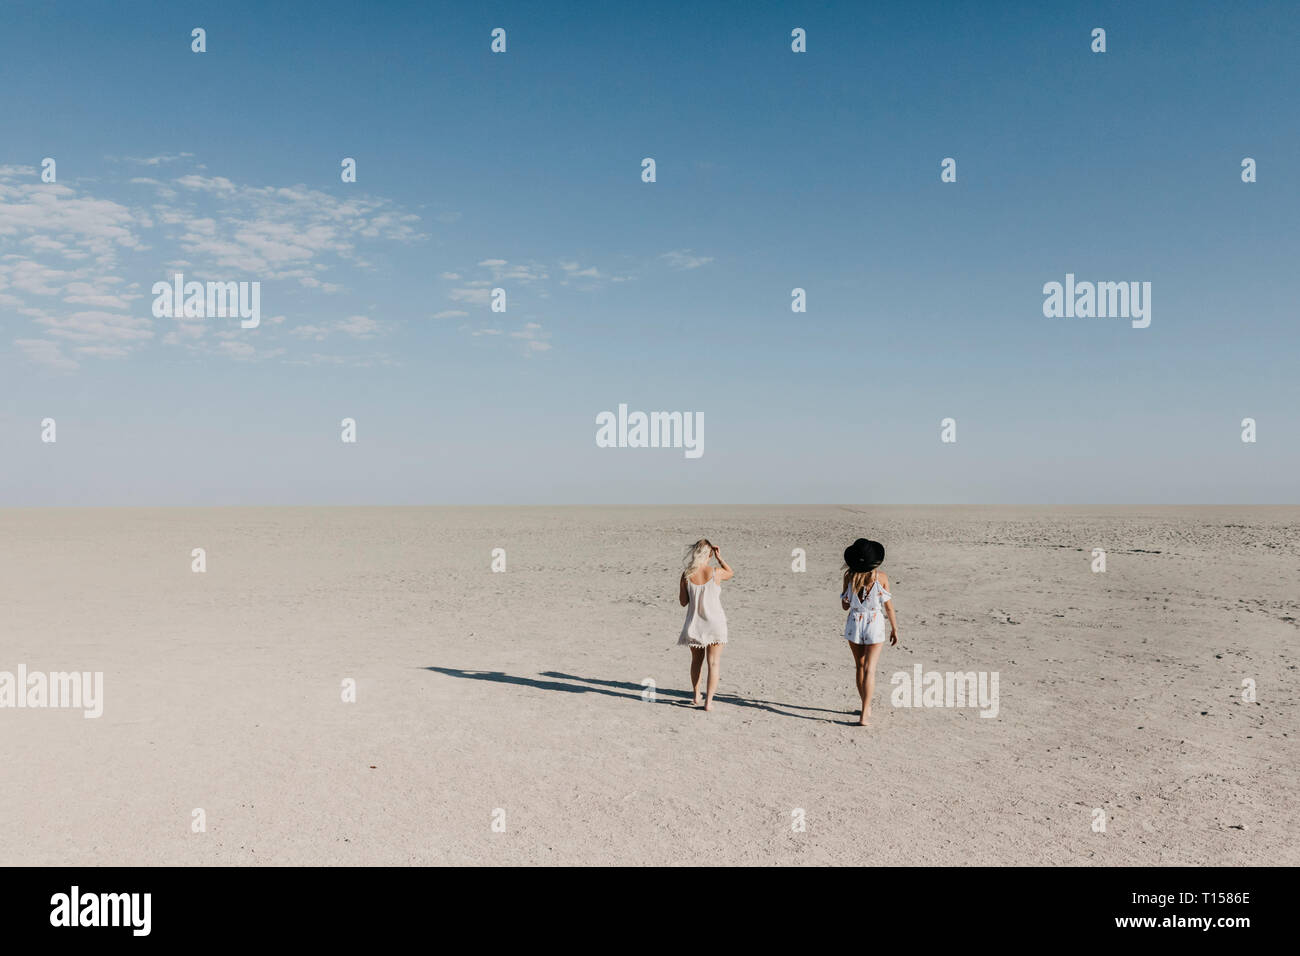 Two young women walking in the desert Stock Photo